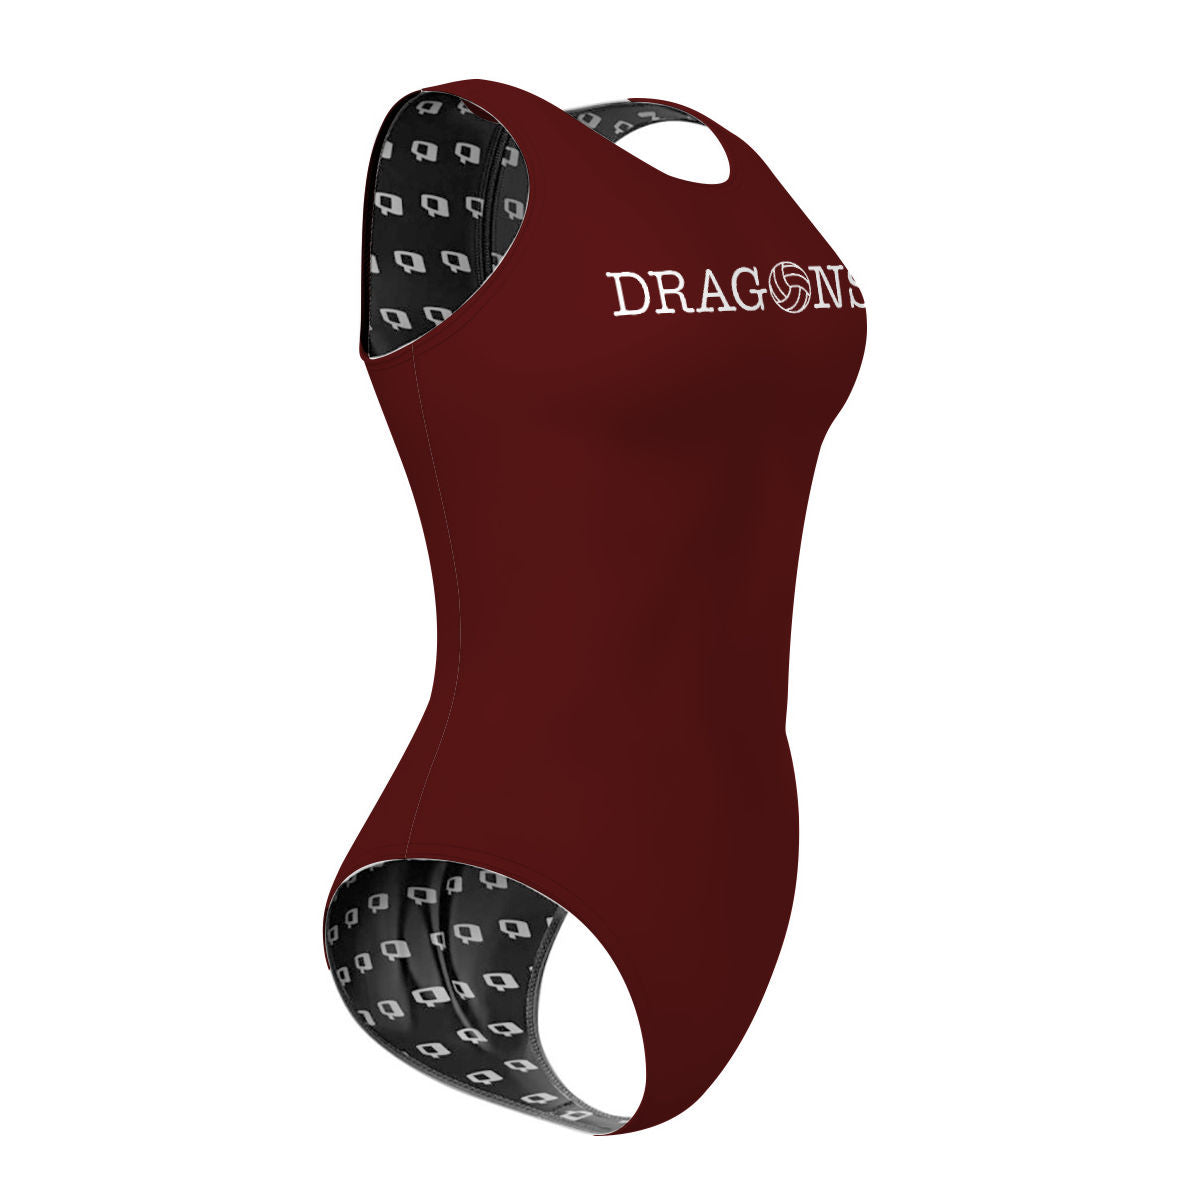 FOOTHILL DRAGONS - Women Waterpolo Swimsuit Classic Cut